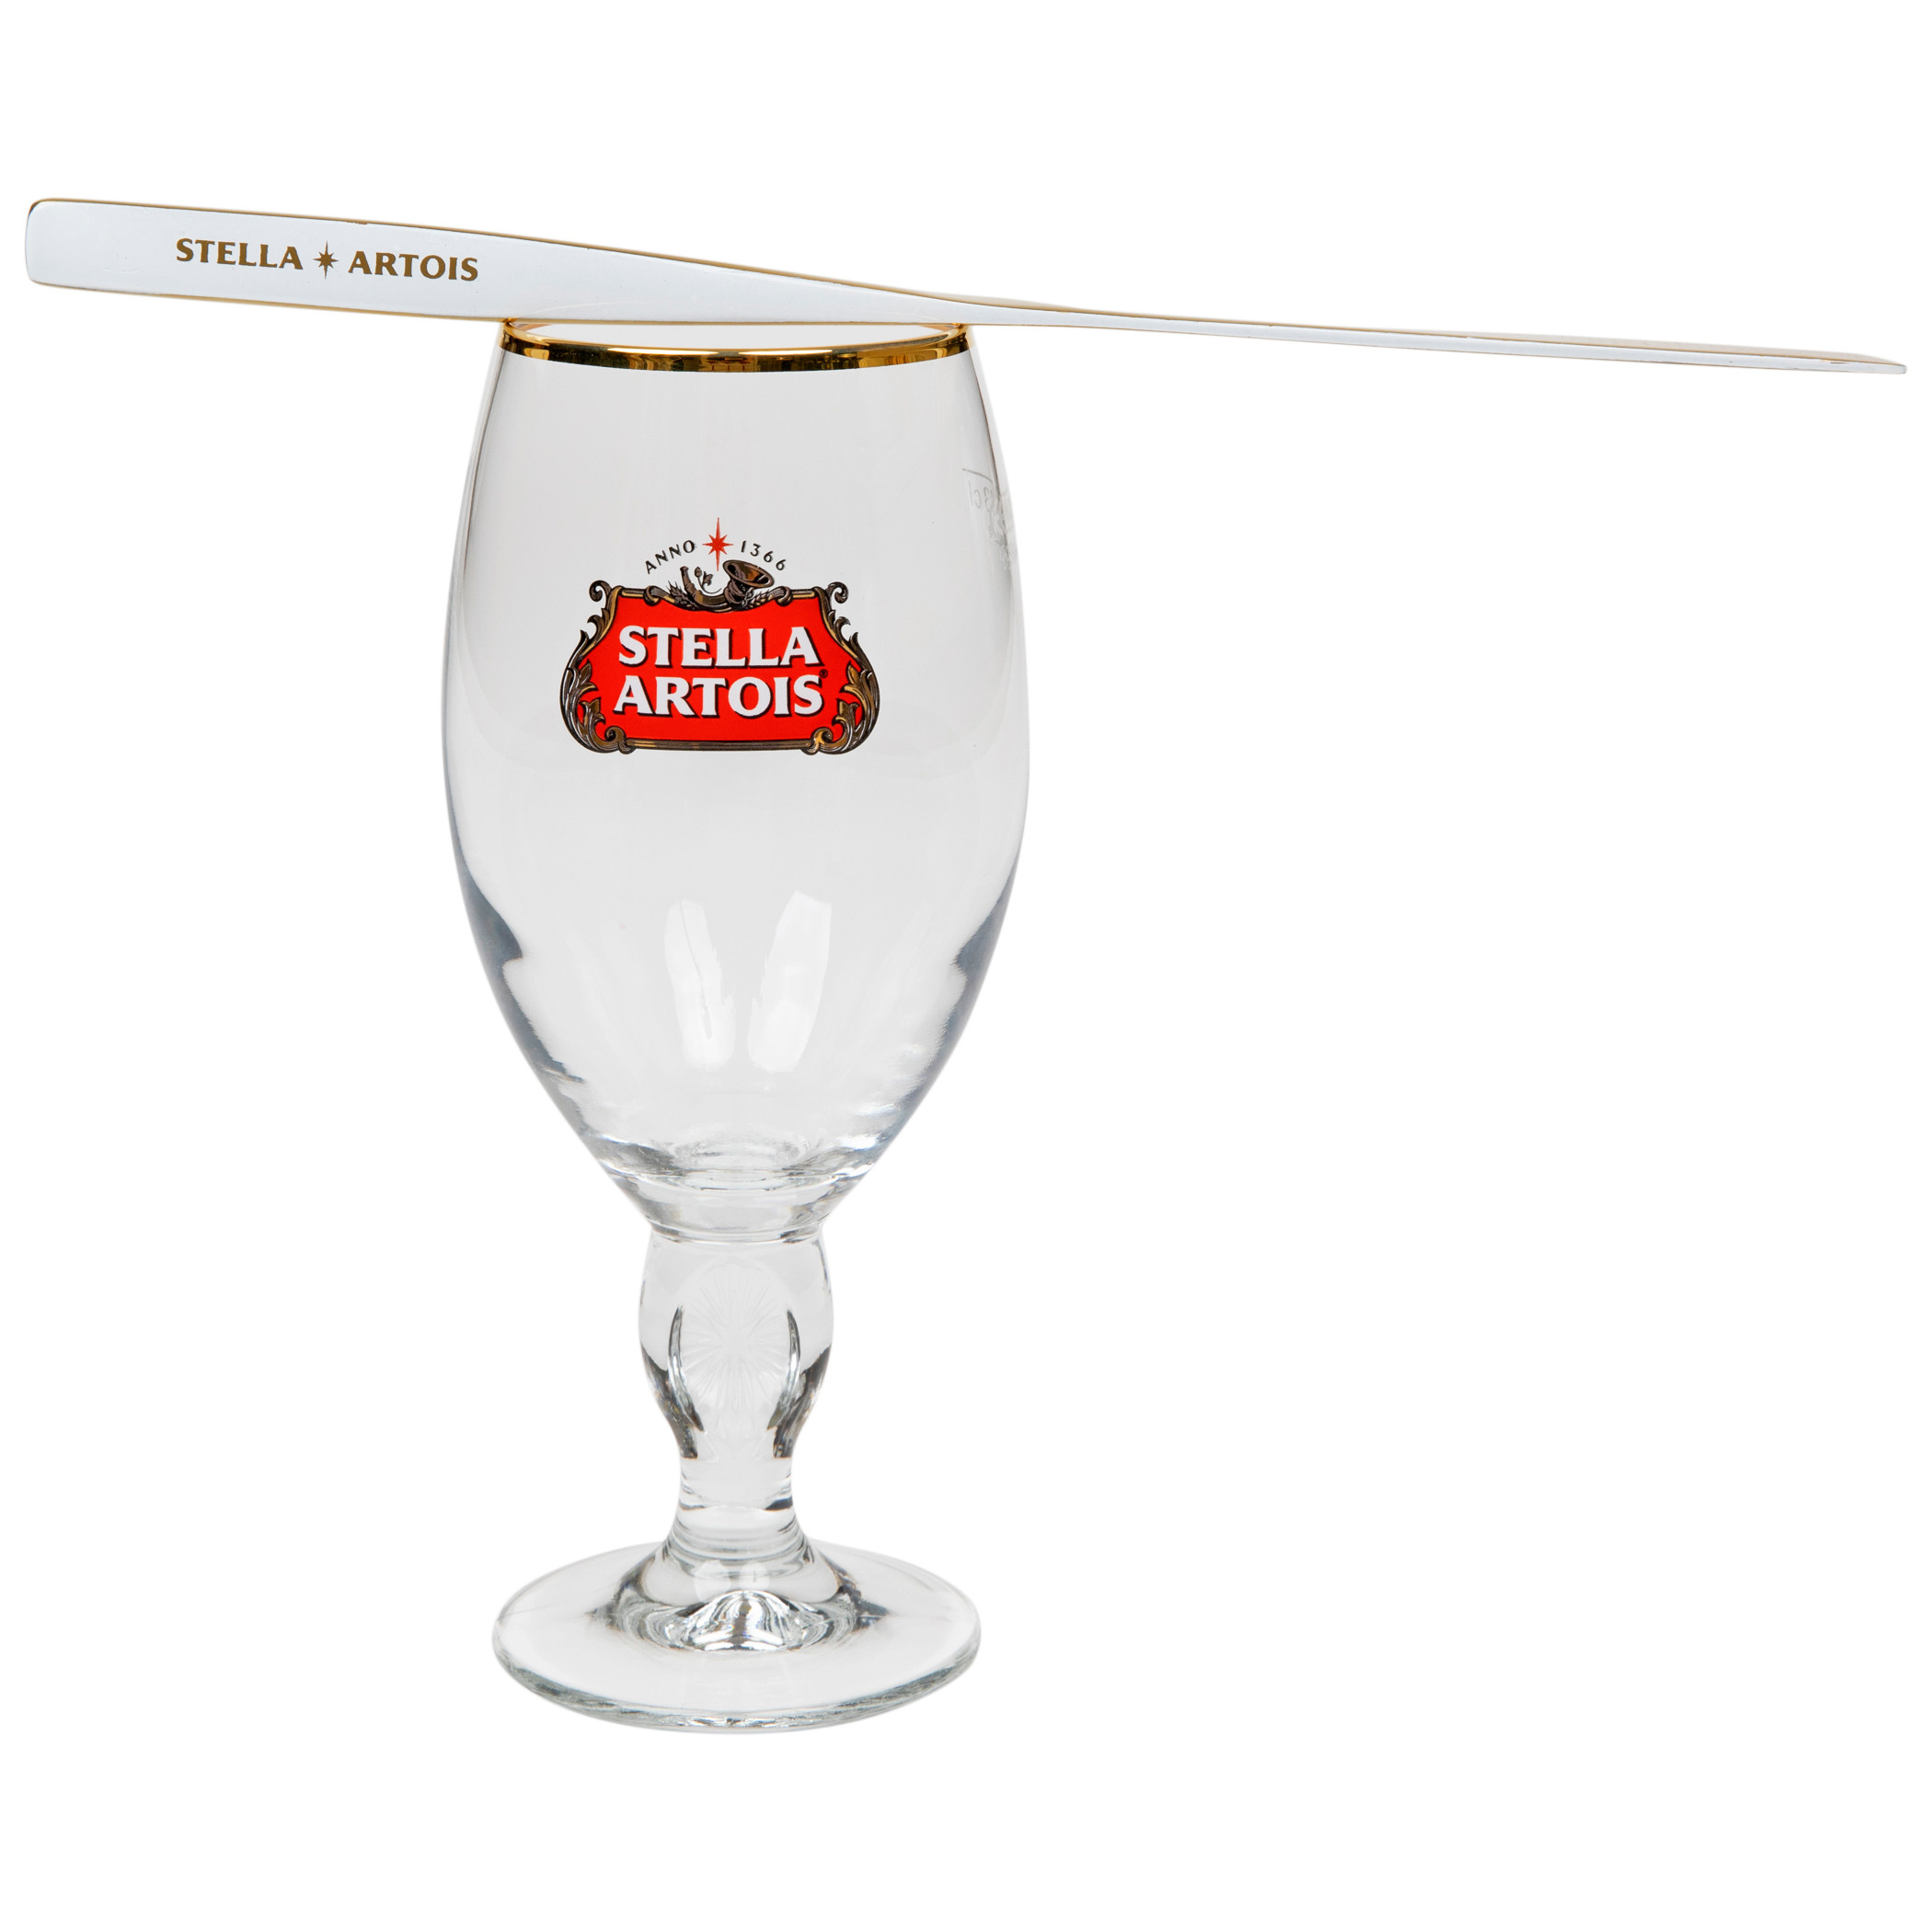 Glassware for lagers: why did my Stella Artois come in this kind of glass?  - Beer, Wine & Spirits Stack Exchange